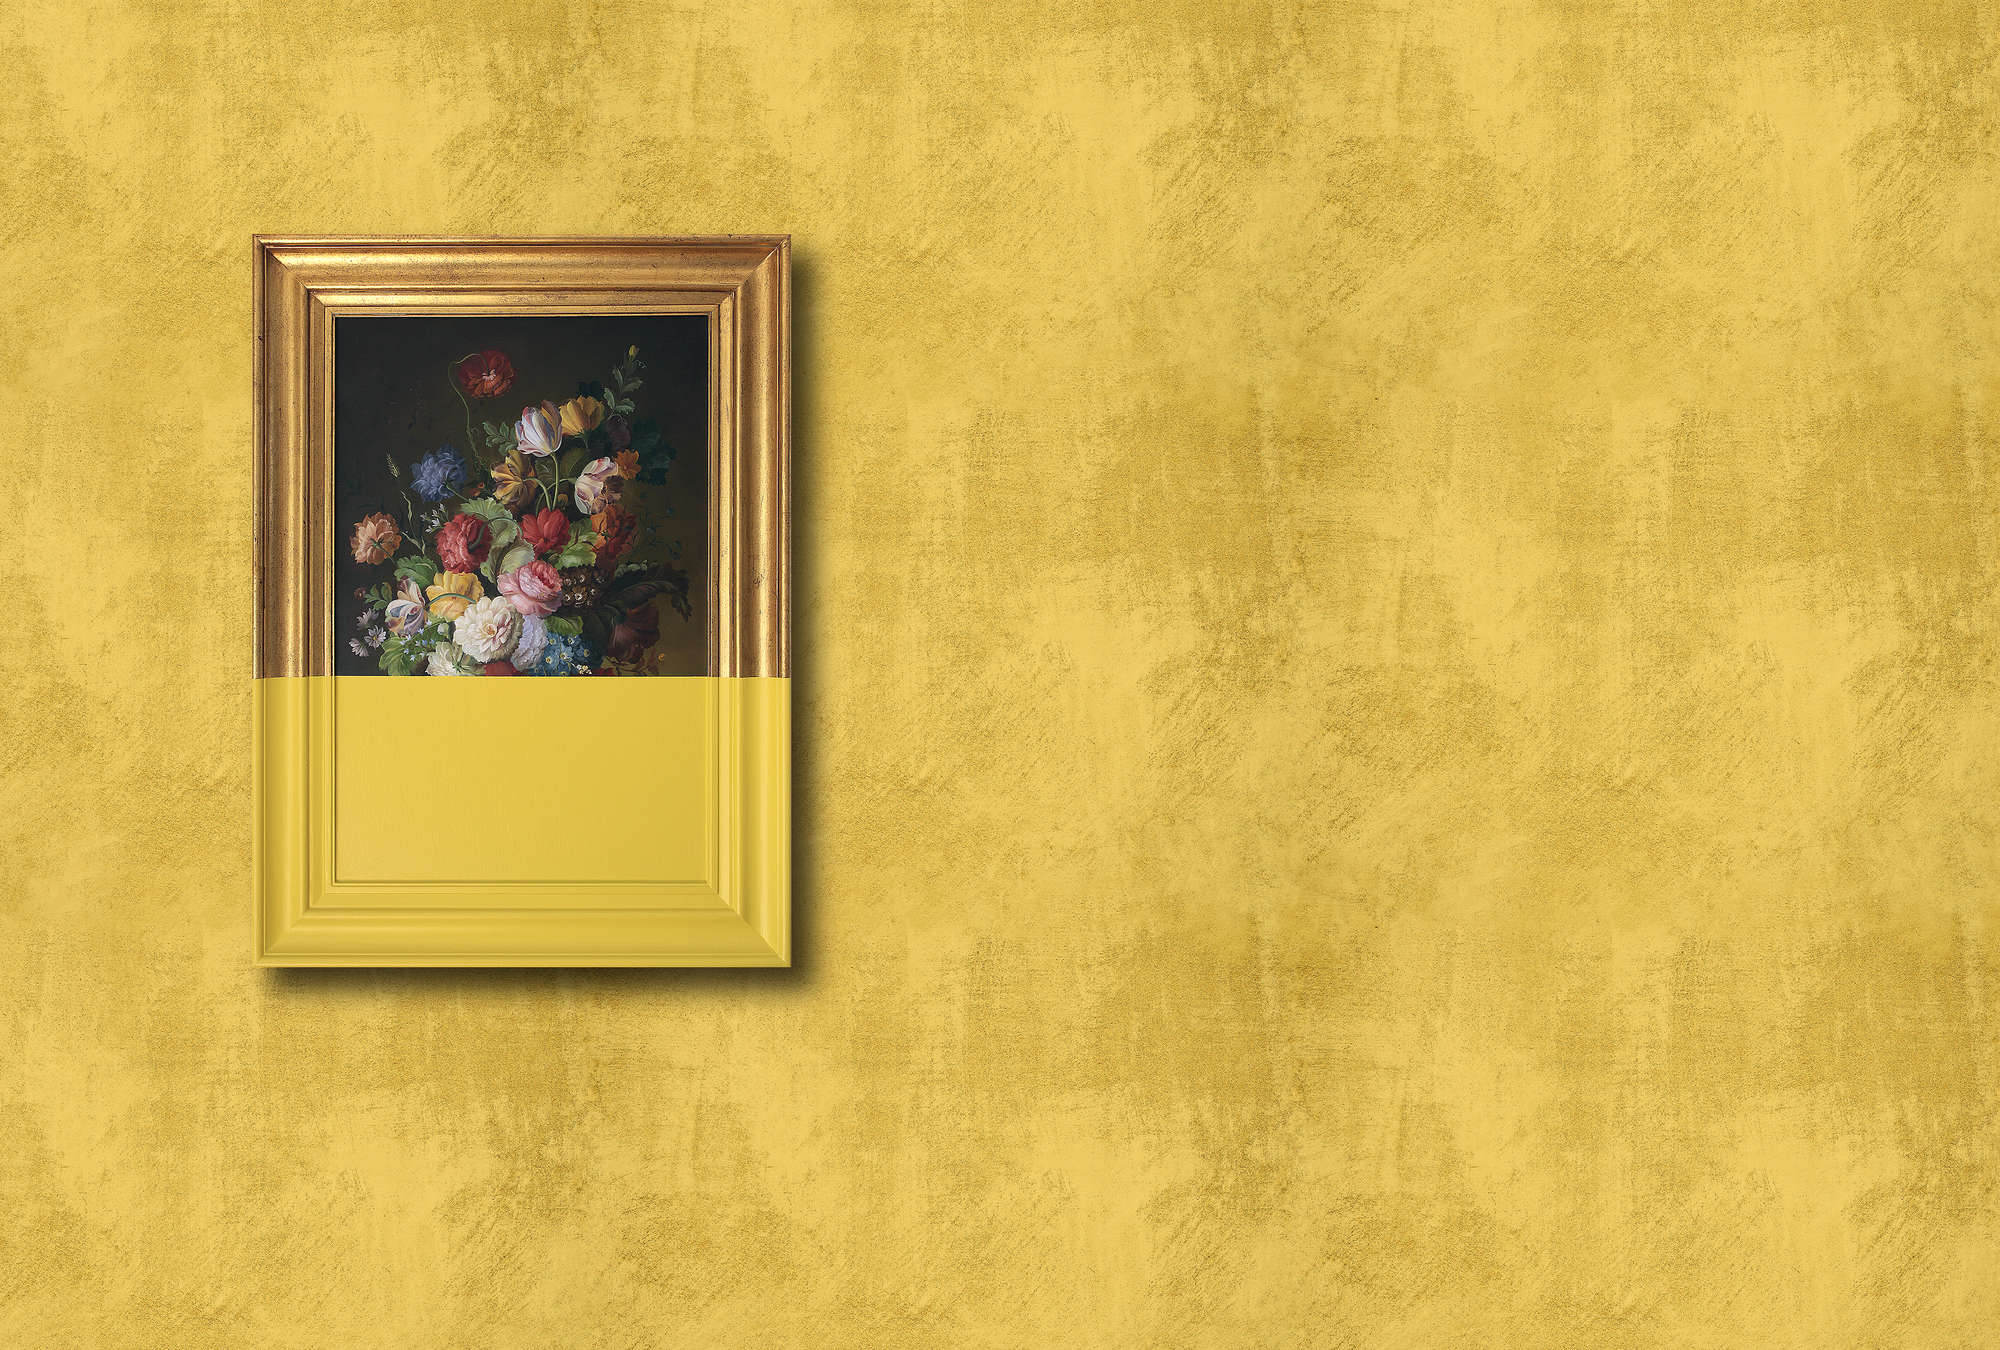             Frame 1 - wall mural art modern interpretation in wiped plaster structure - yellow, copper | mother-of-pearl smooth fleece
        